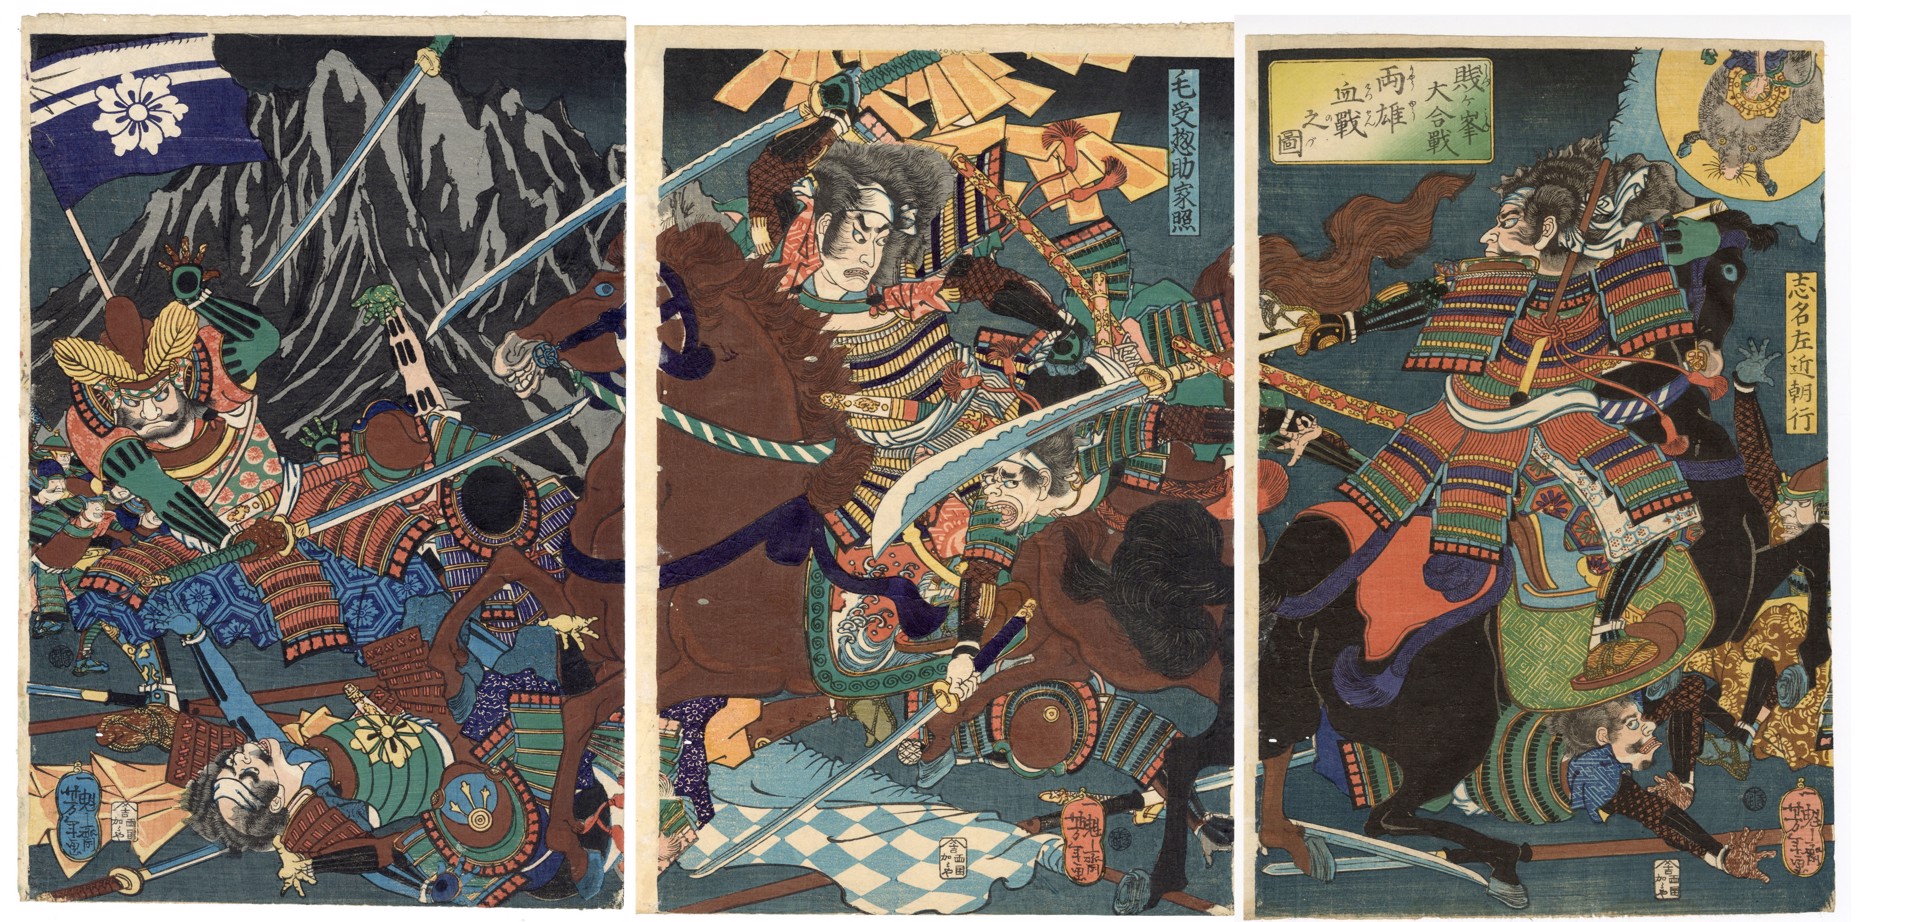 The Bloody Fight Between Two(2) Brave Warriors at the Great Battle of Shizugatake (1583) by Yoshitoshi